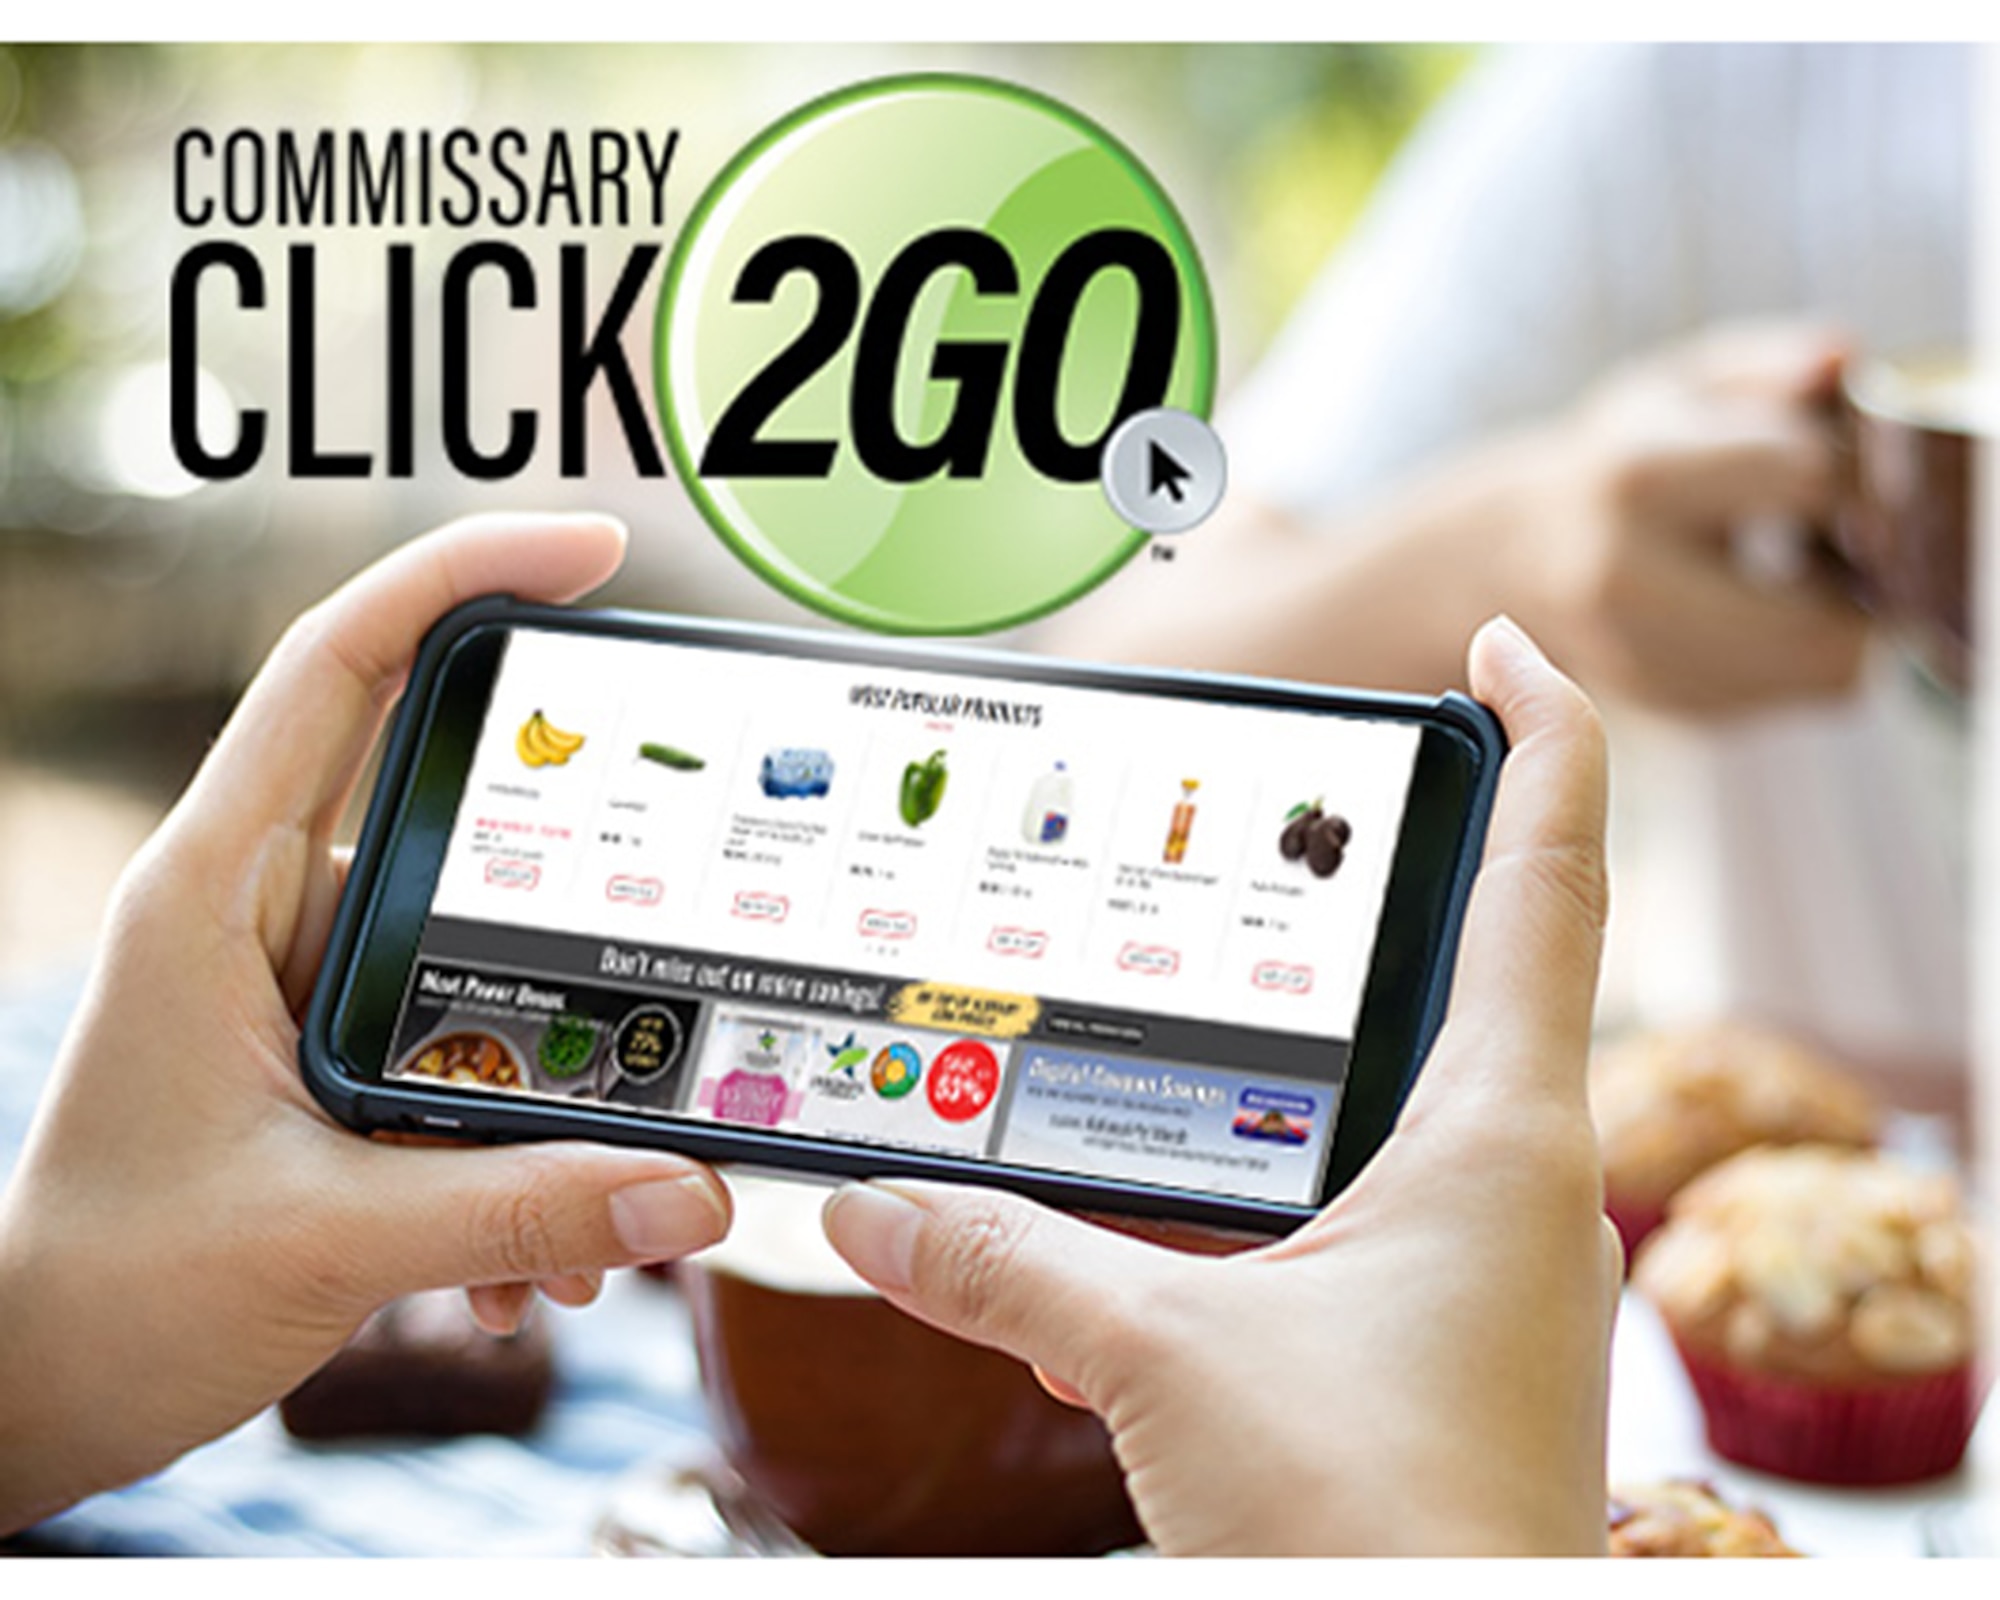 Hill Air Force Base commissary will open a new online ordering and curbside delivery service called Commissary CLICK2GO starting Aug. 20, 2021. (Courtesy photo)